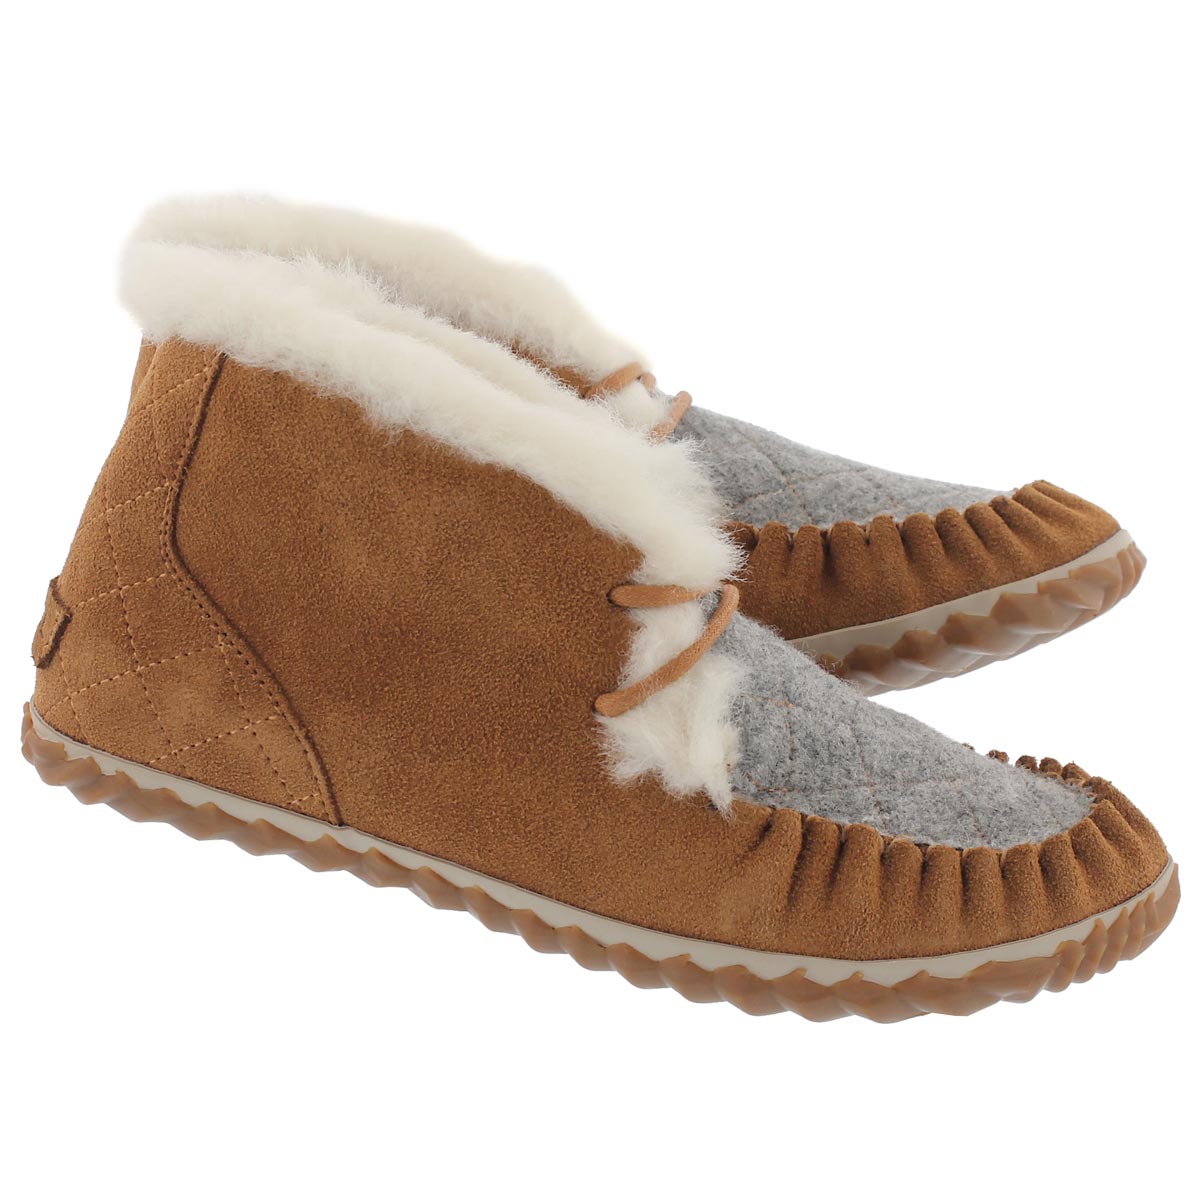 Sorel Women's Out 'N About Moccasin | eBay